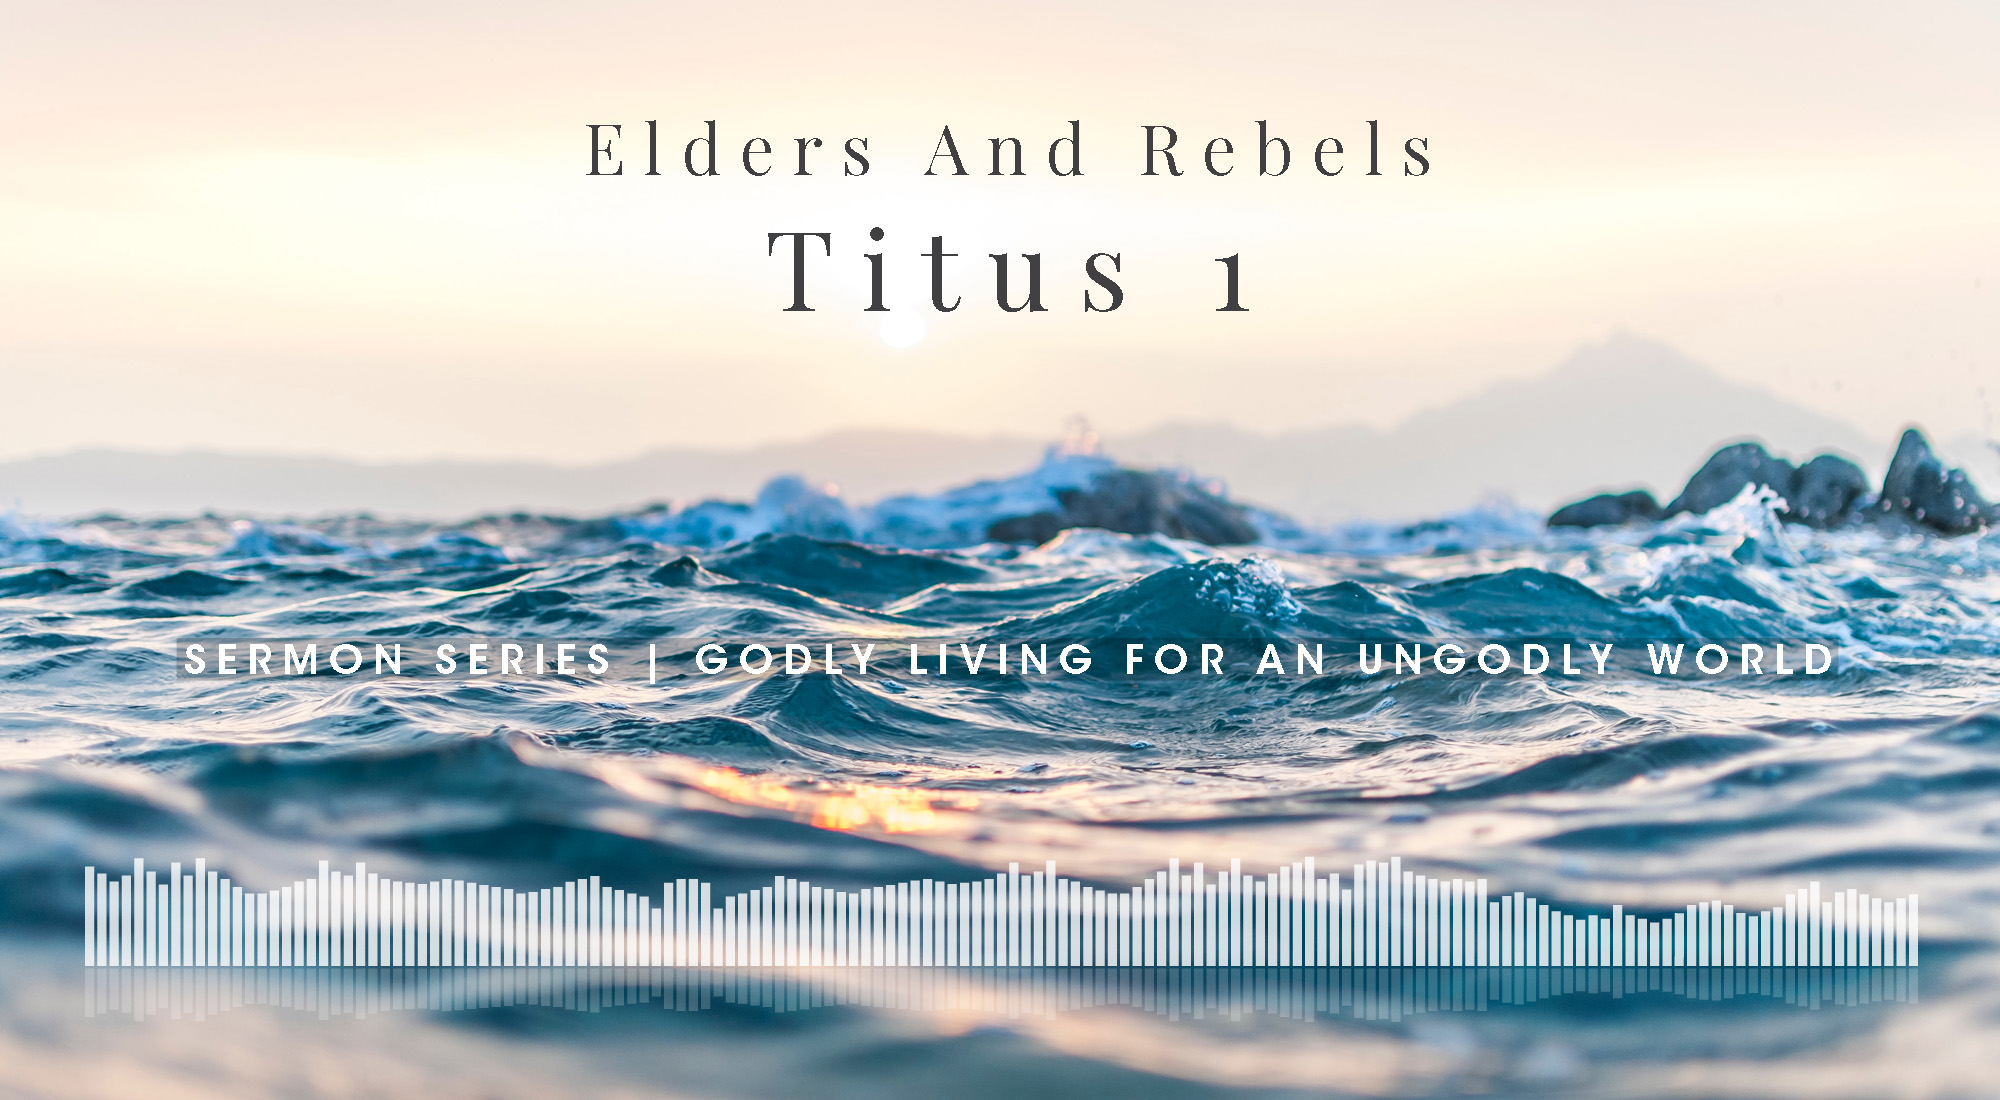 Sermon Series Titus 1, Godly Living In An UnGodly World